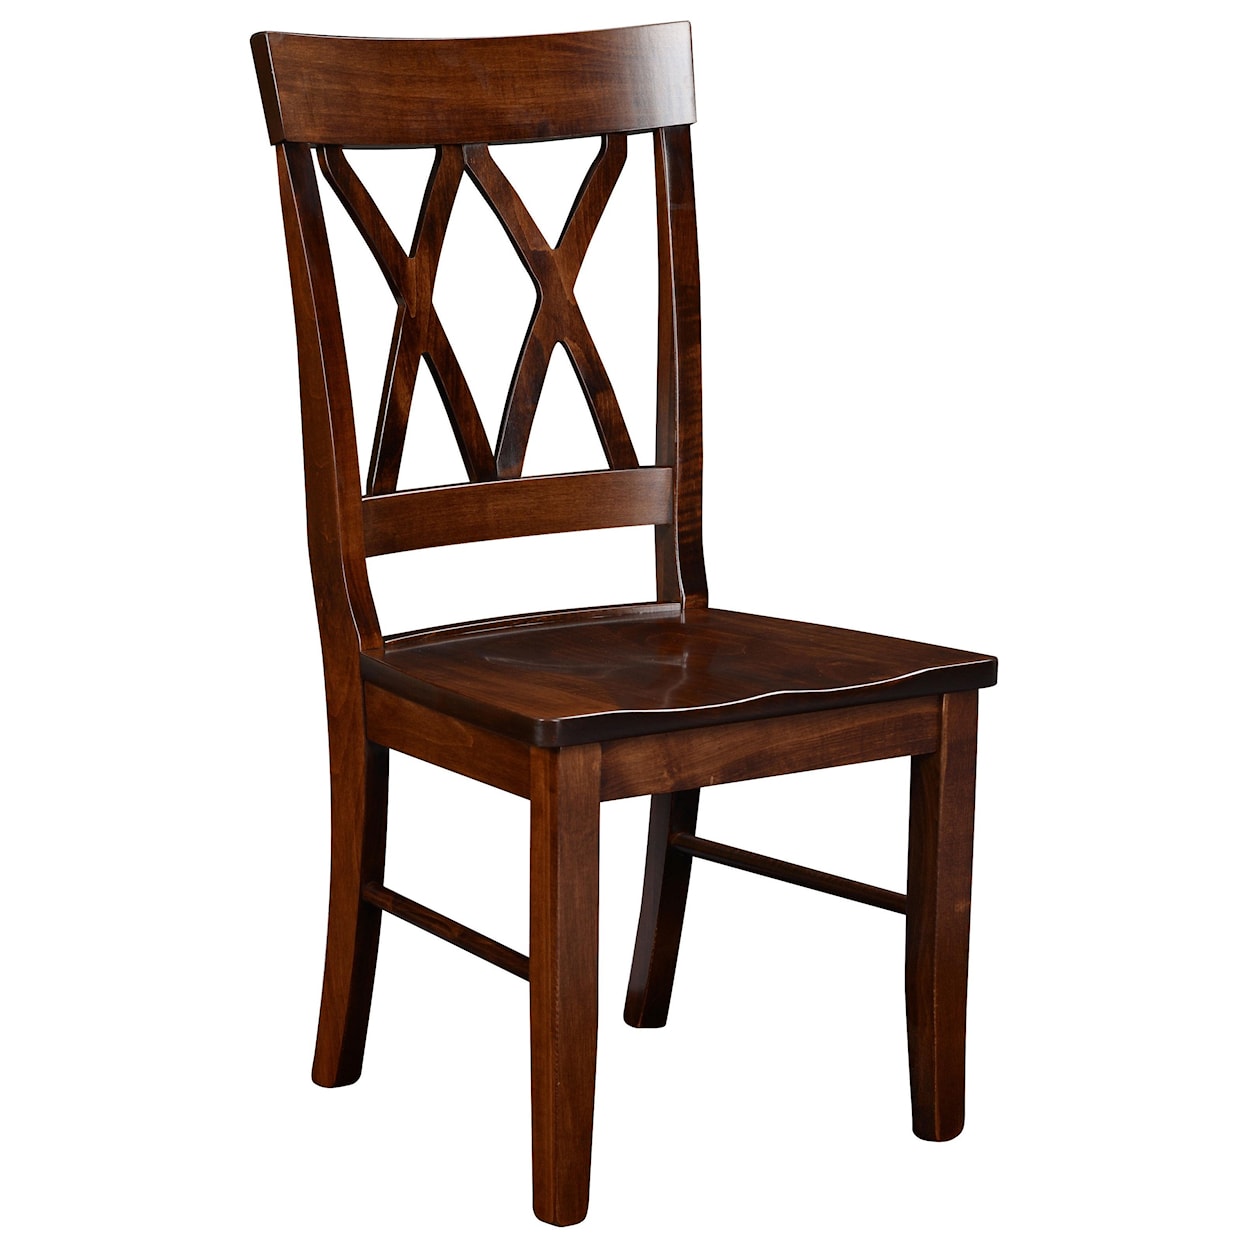 Wengerd Wood Products Fontana Side Chair